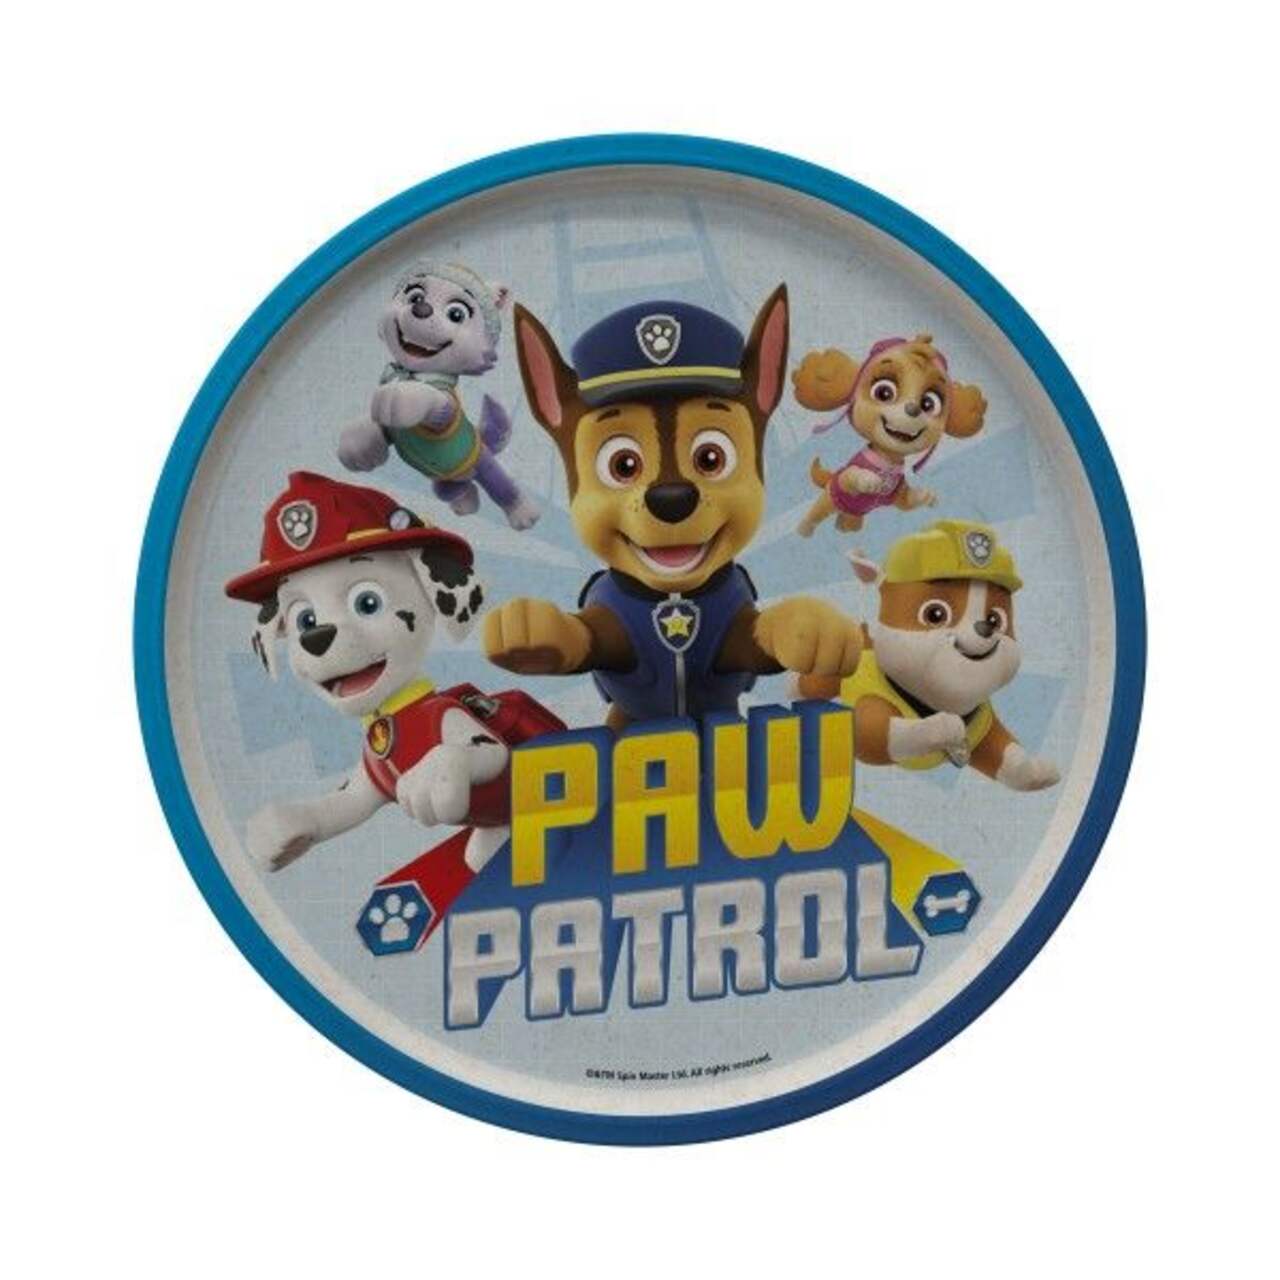 https://media-www.canadiantire.ca/product/living/kitchen/dining-and-entertaining/1422934/paw-patrol-boy-3-section-plate-afb8d433-66e1-40a9-9922-f8d26fda49b2-jpgrendition.jpg?imdensity=1&imwidth=640&impolicy=mZoom